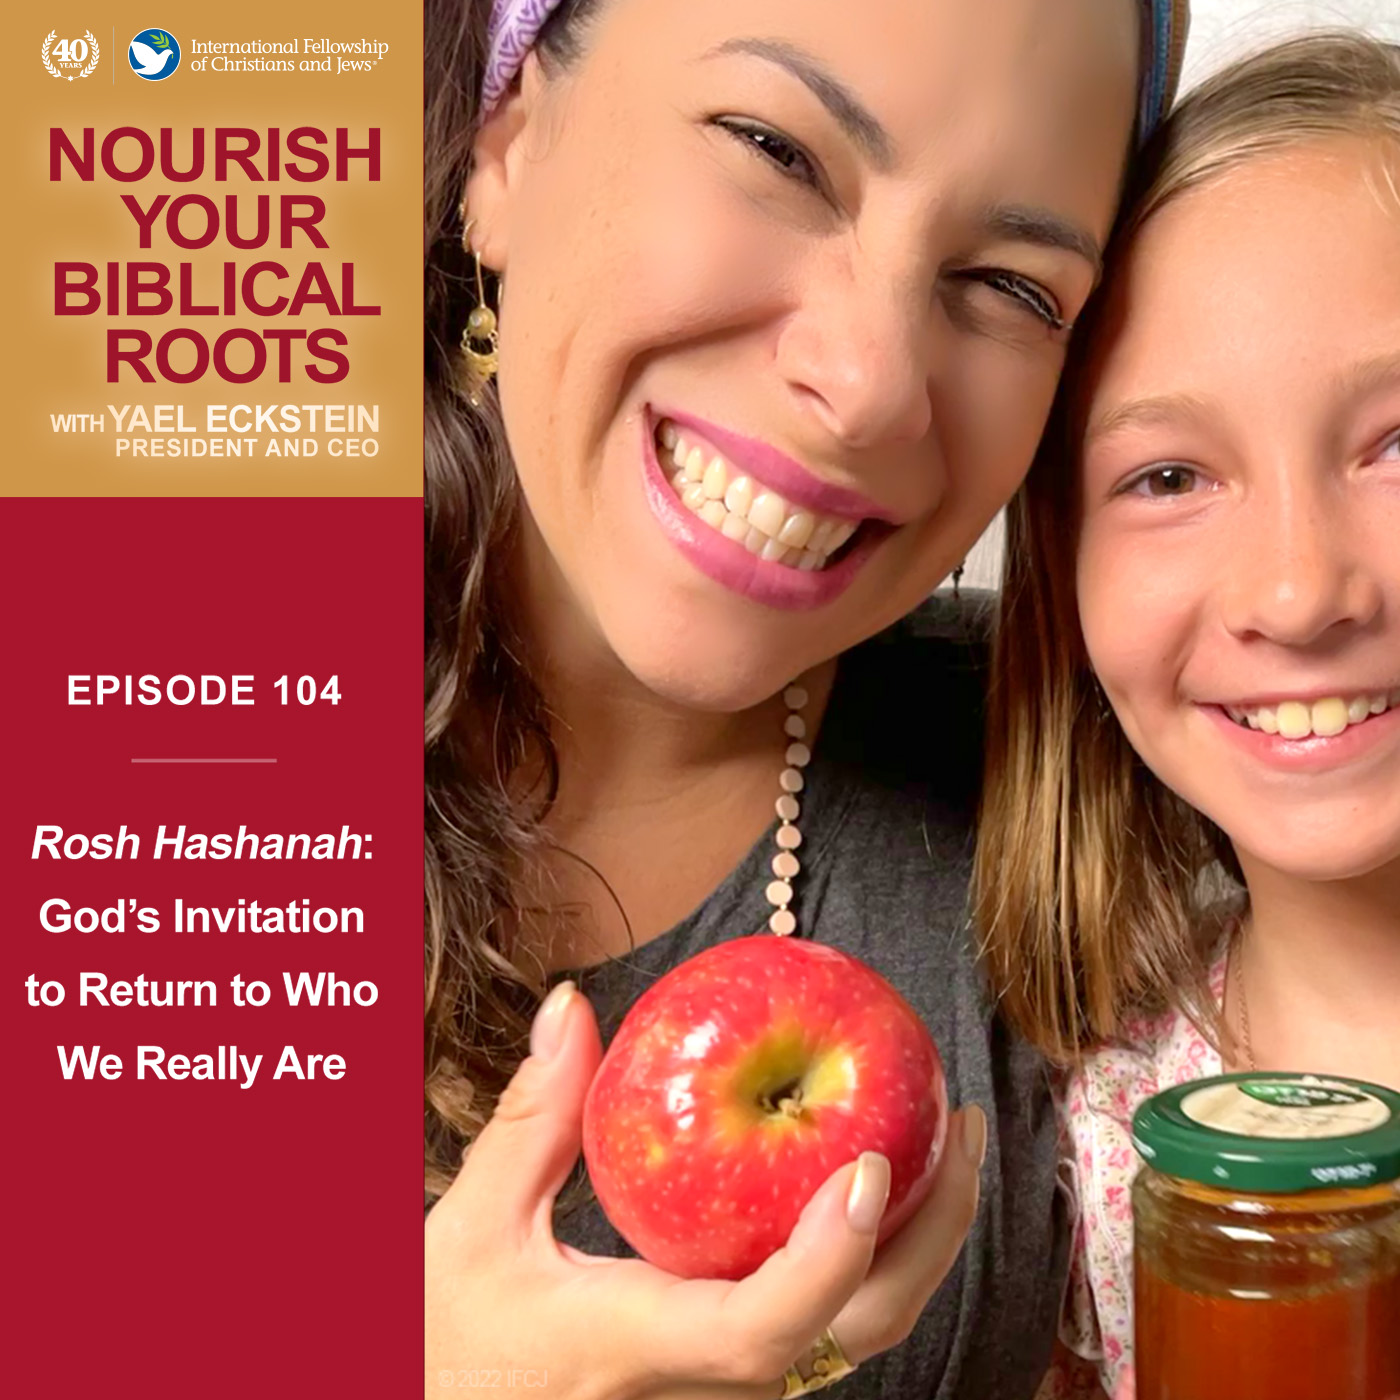 Rosh Hashanah: God's Invitation to Return to Who We Really Are